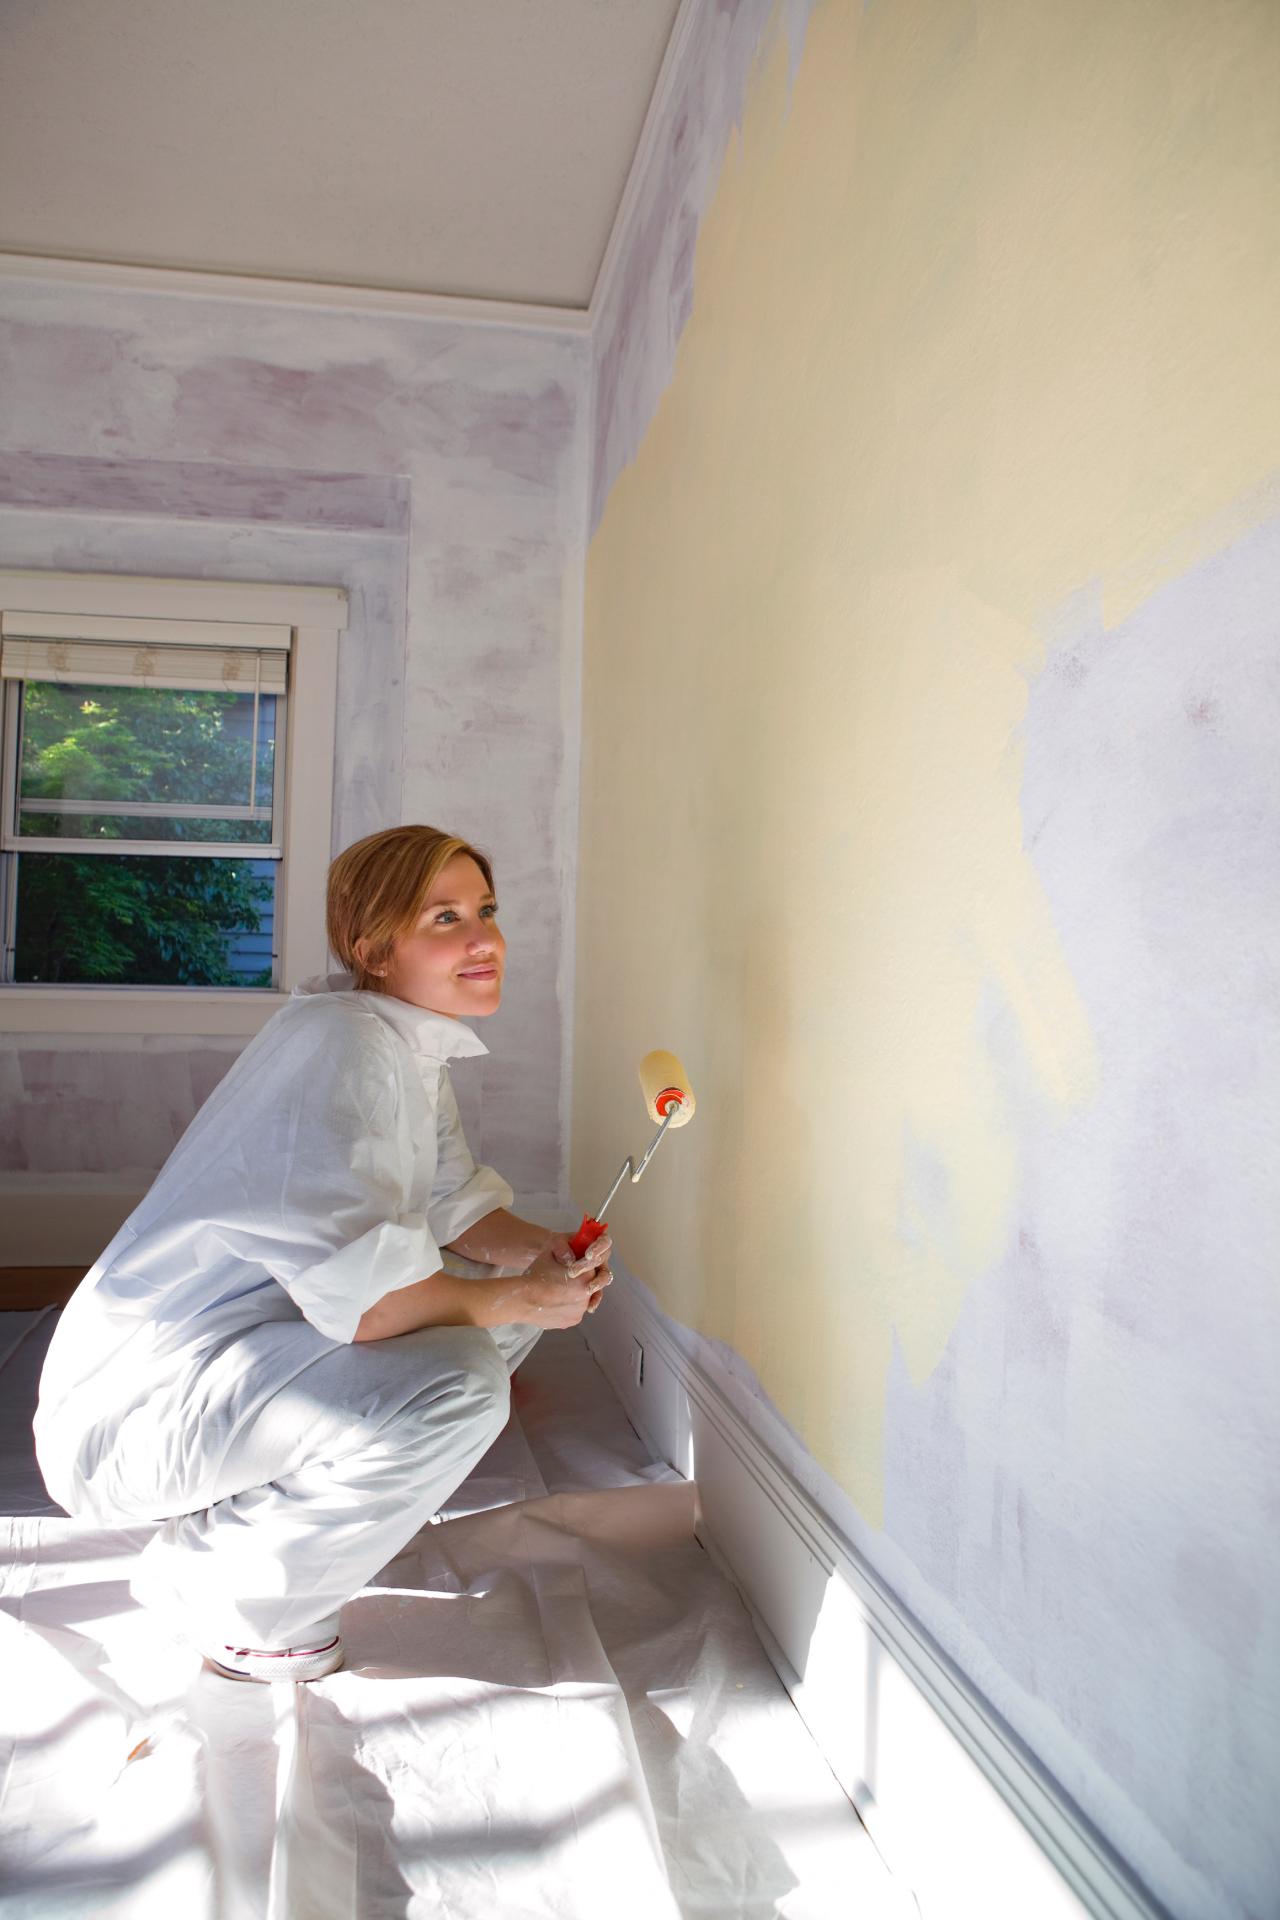 The Top 10 Ways To Paint Like A Pro Diy